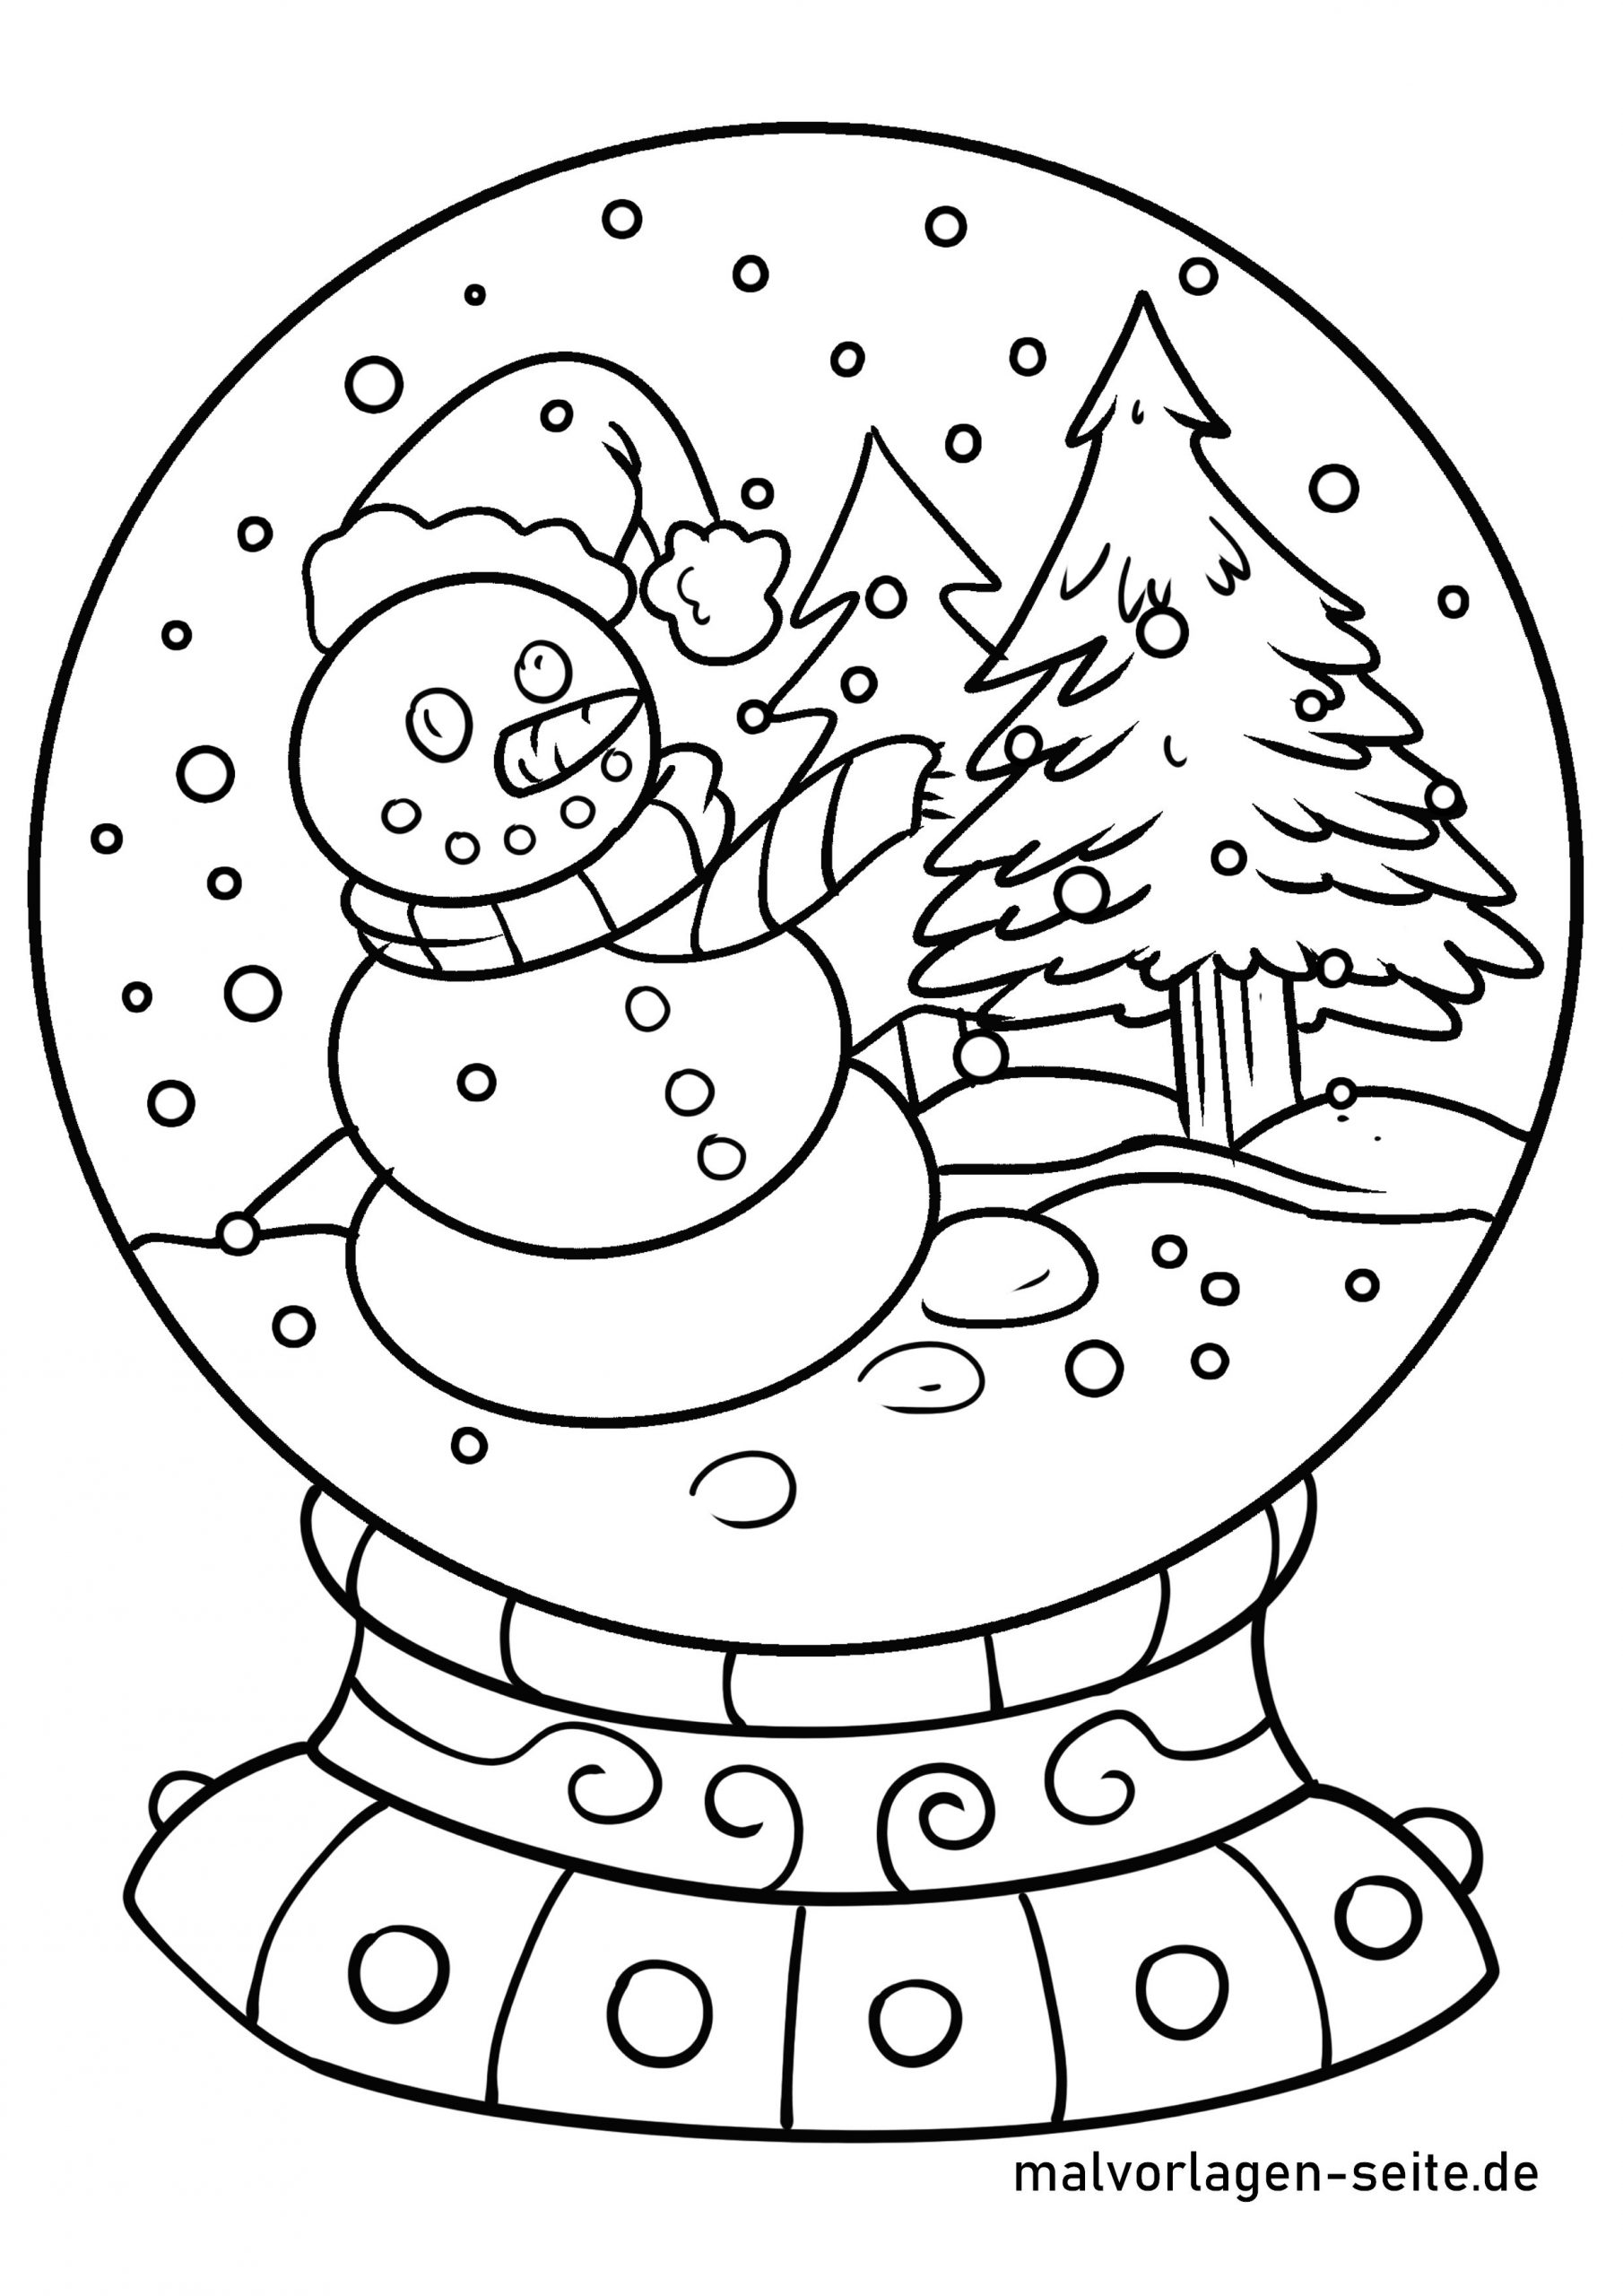 coloring : Winter Coloring Book Best Of Coloring Page Snow Globe Winter Coloring  Pages Free Winter Coloring Book ~ queens